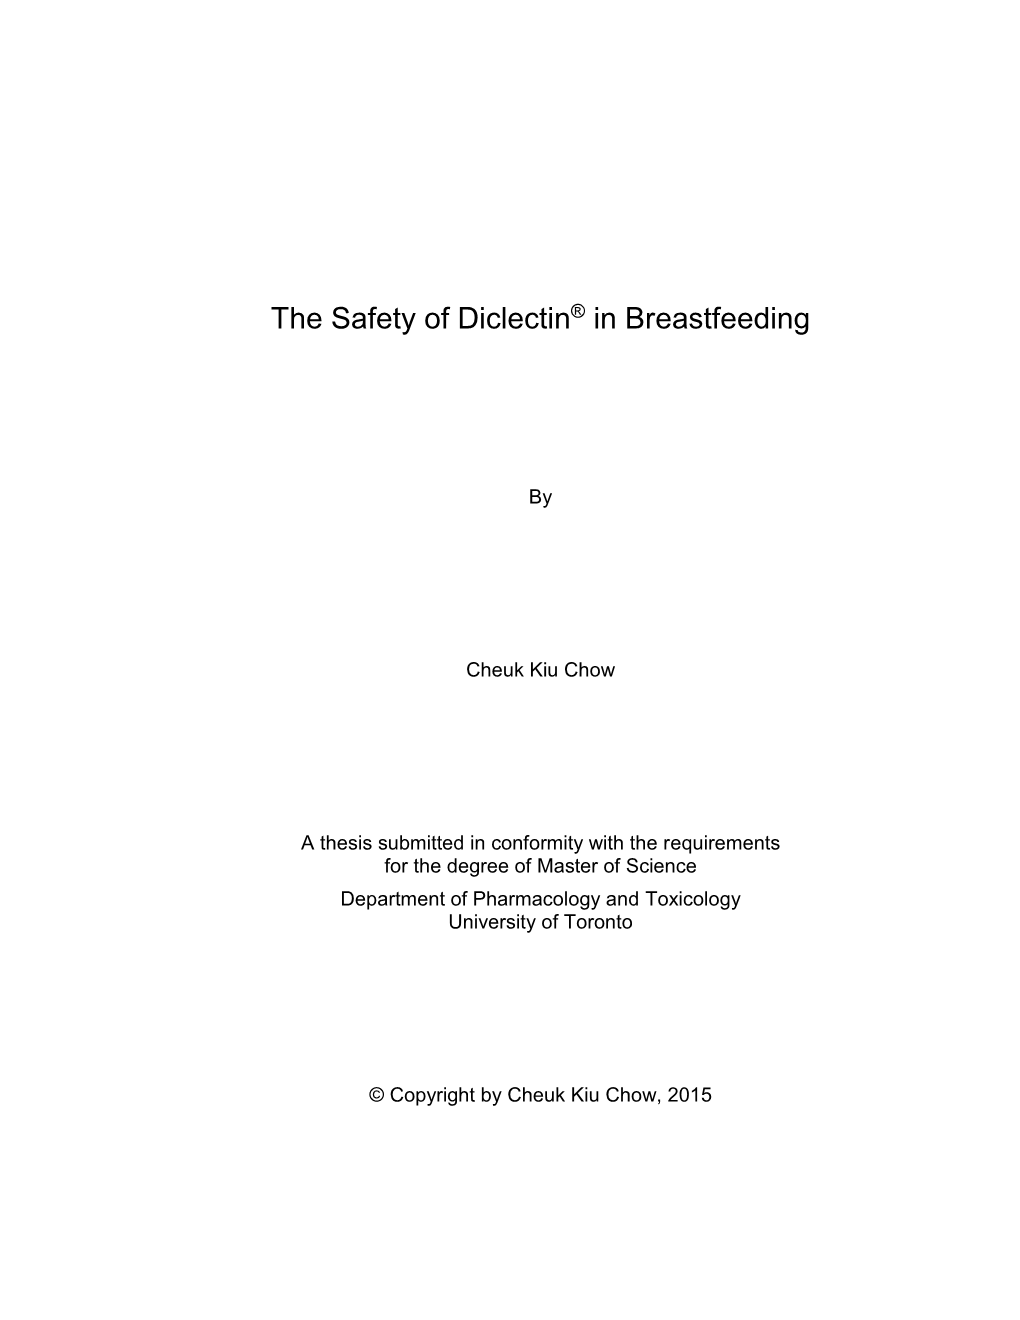 The Safety of Diclectin® in Breastfeeding